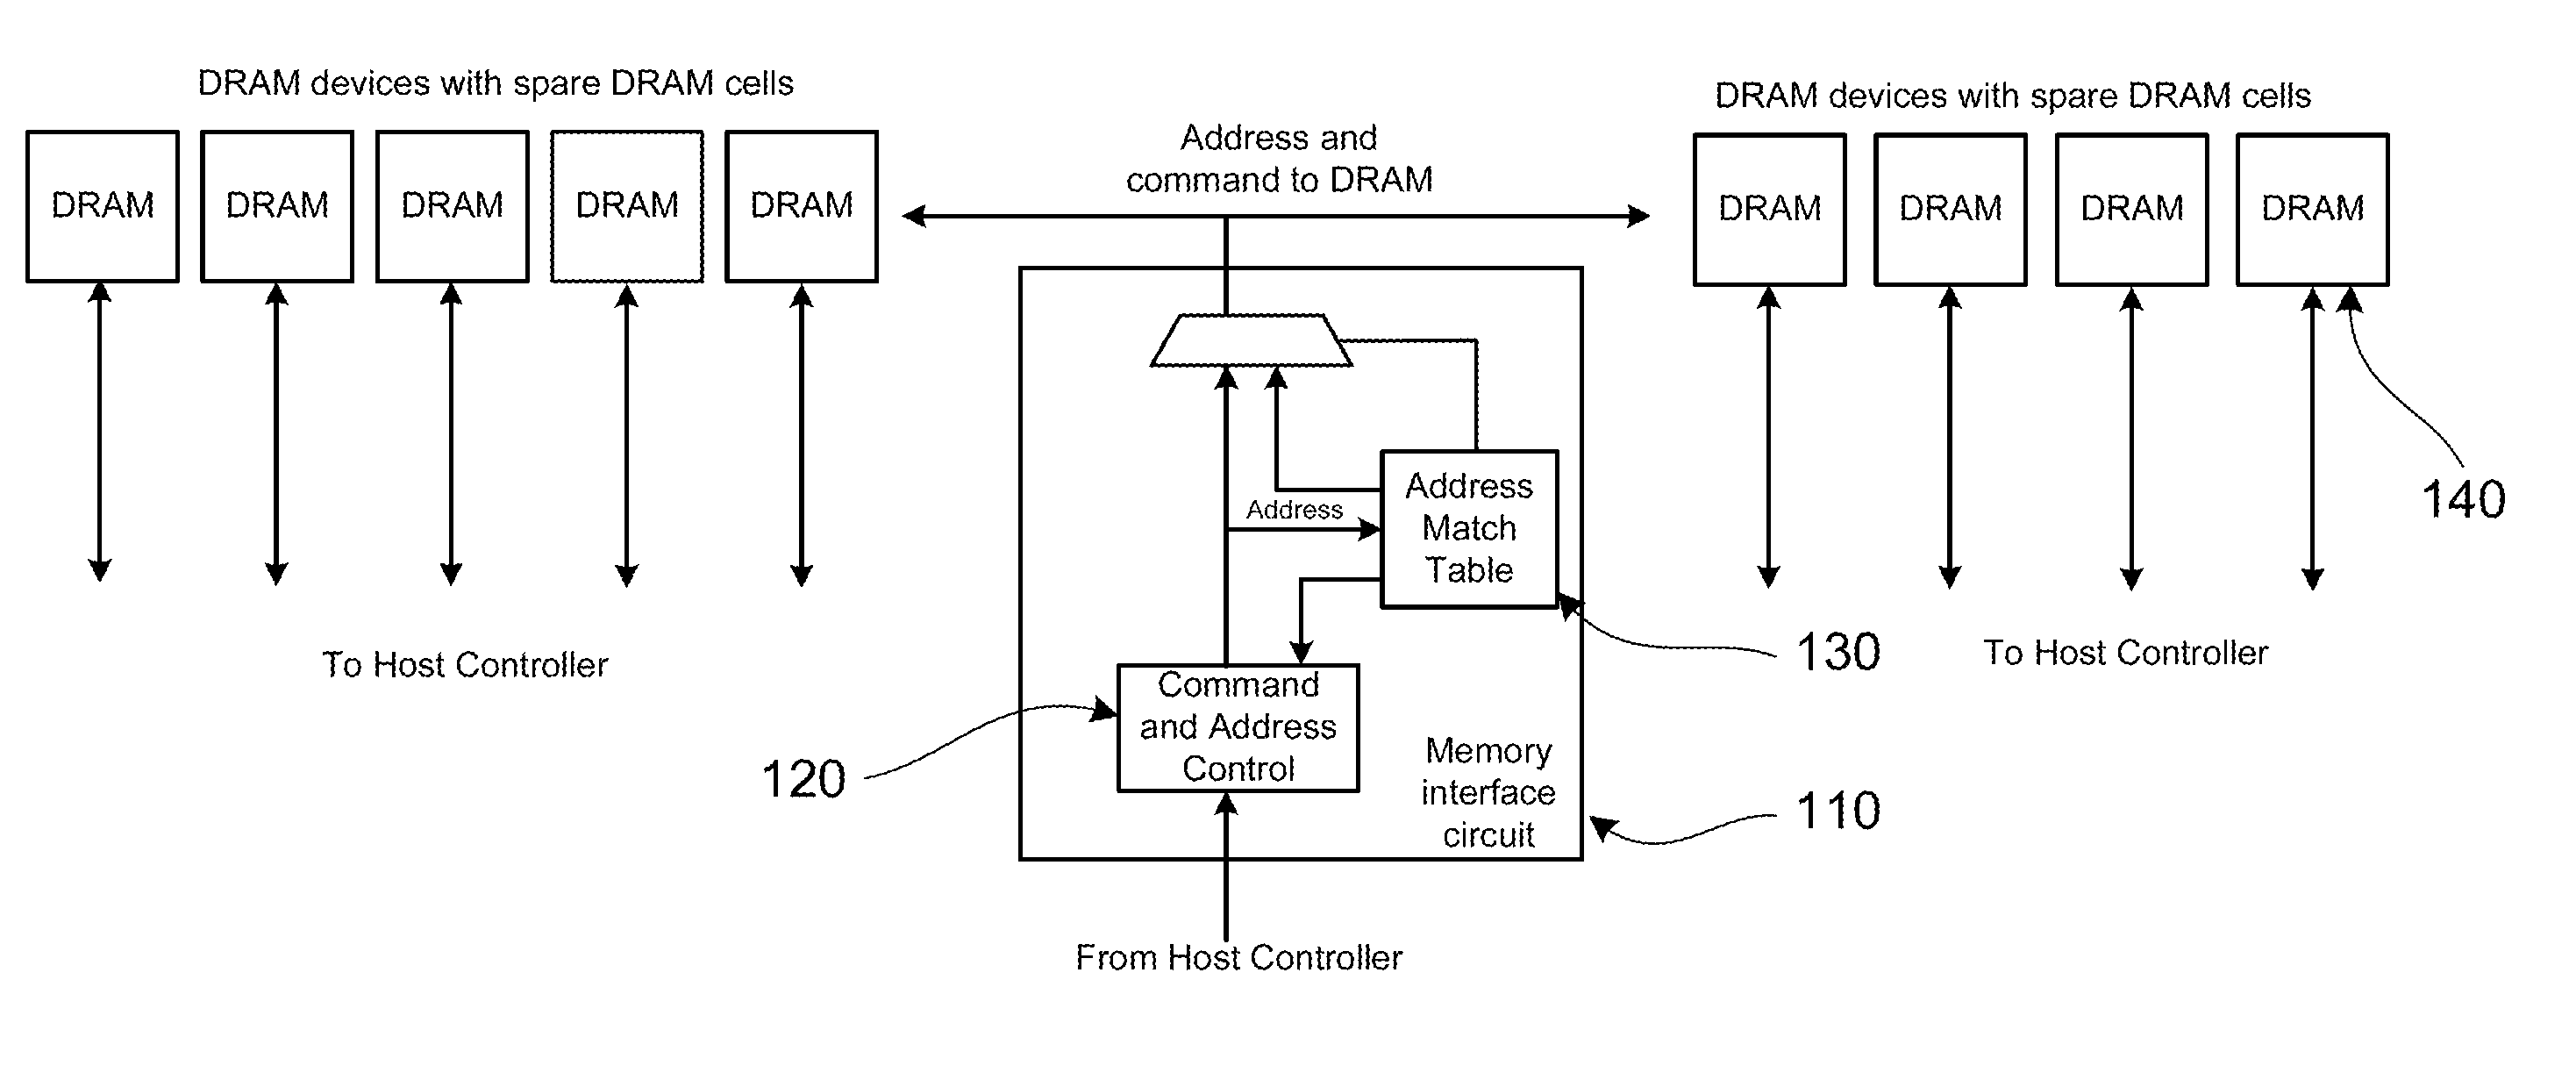 Single chip mixed memory for dynamic replacement of DRAM bad cell